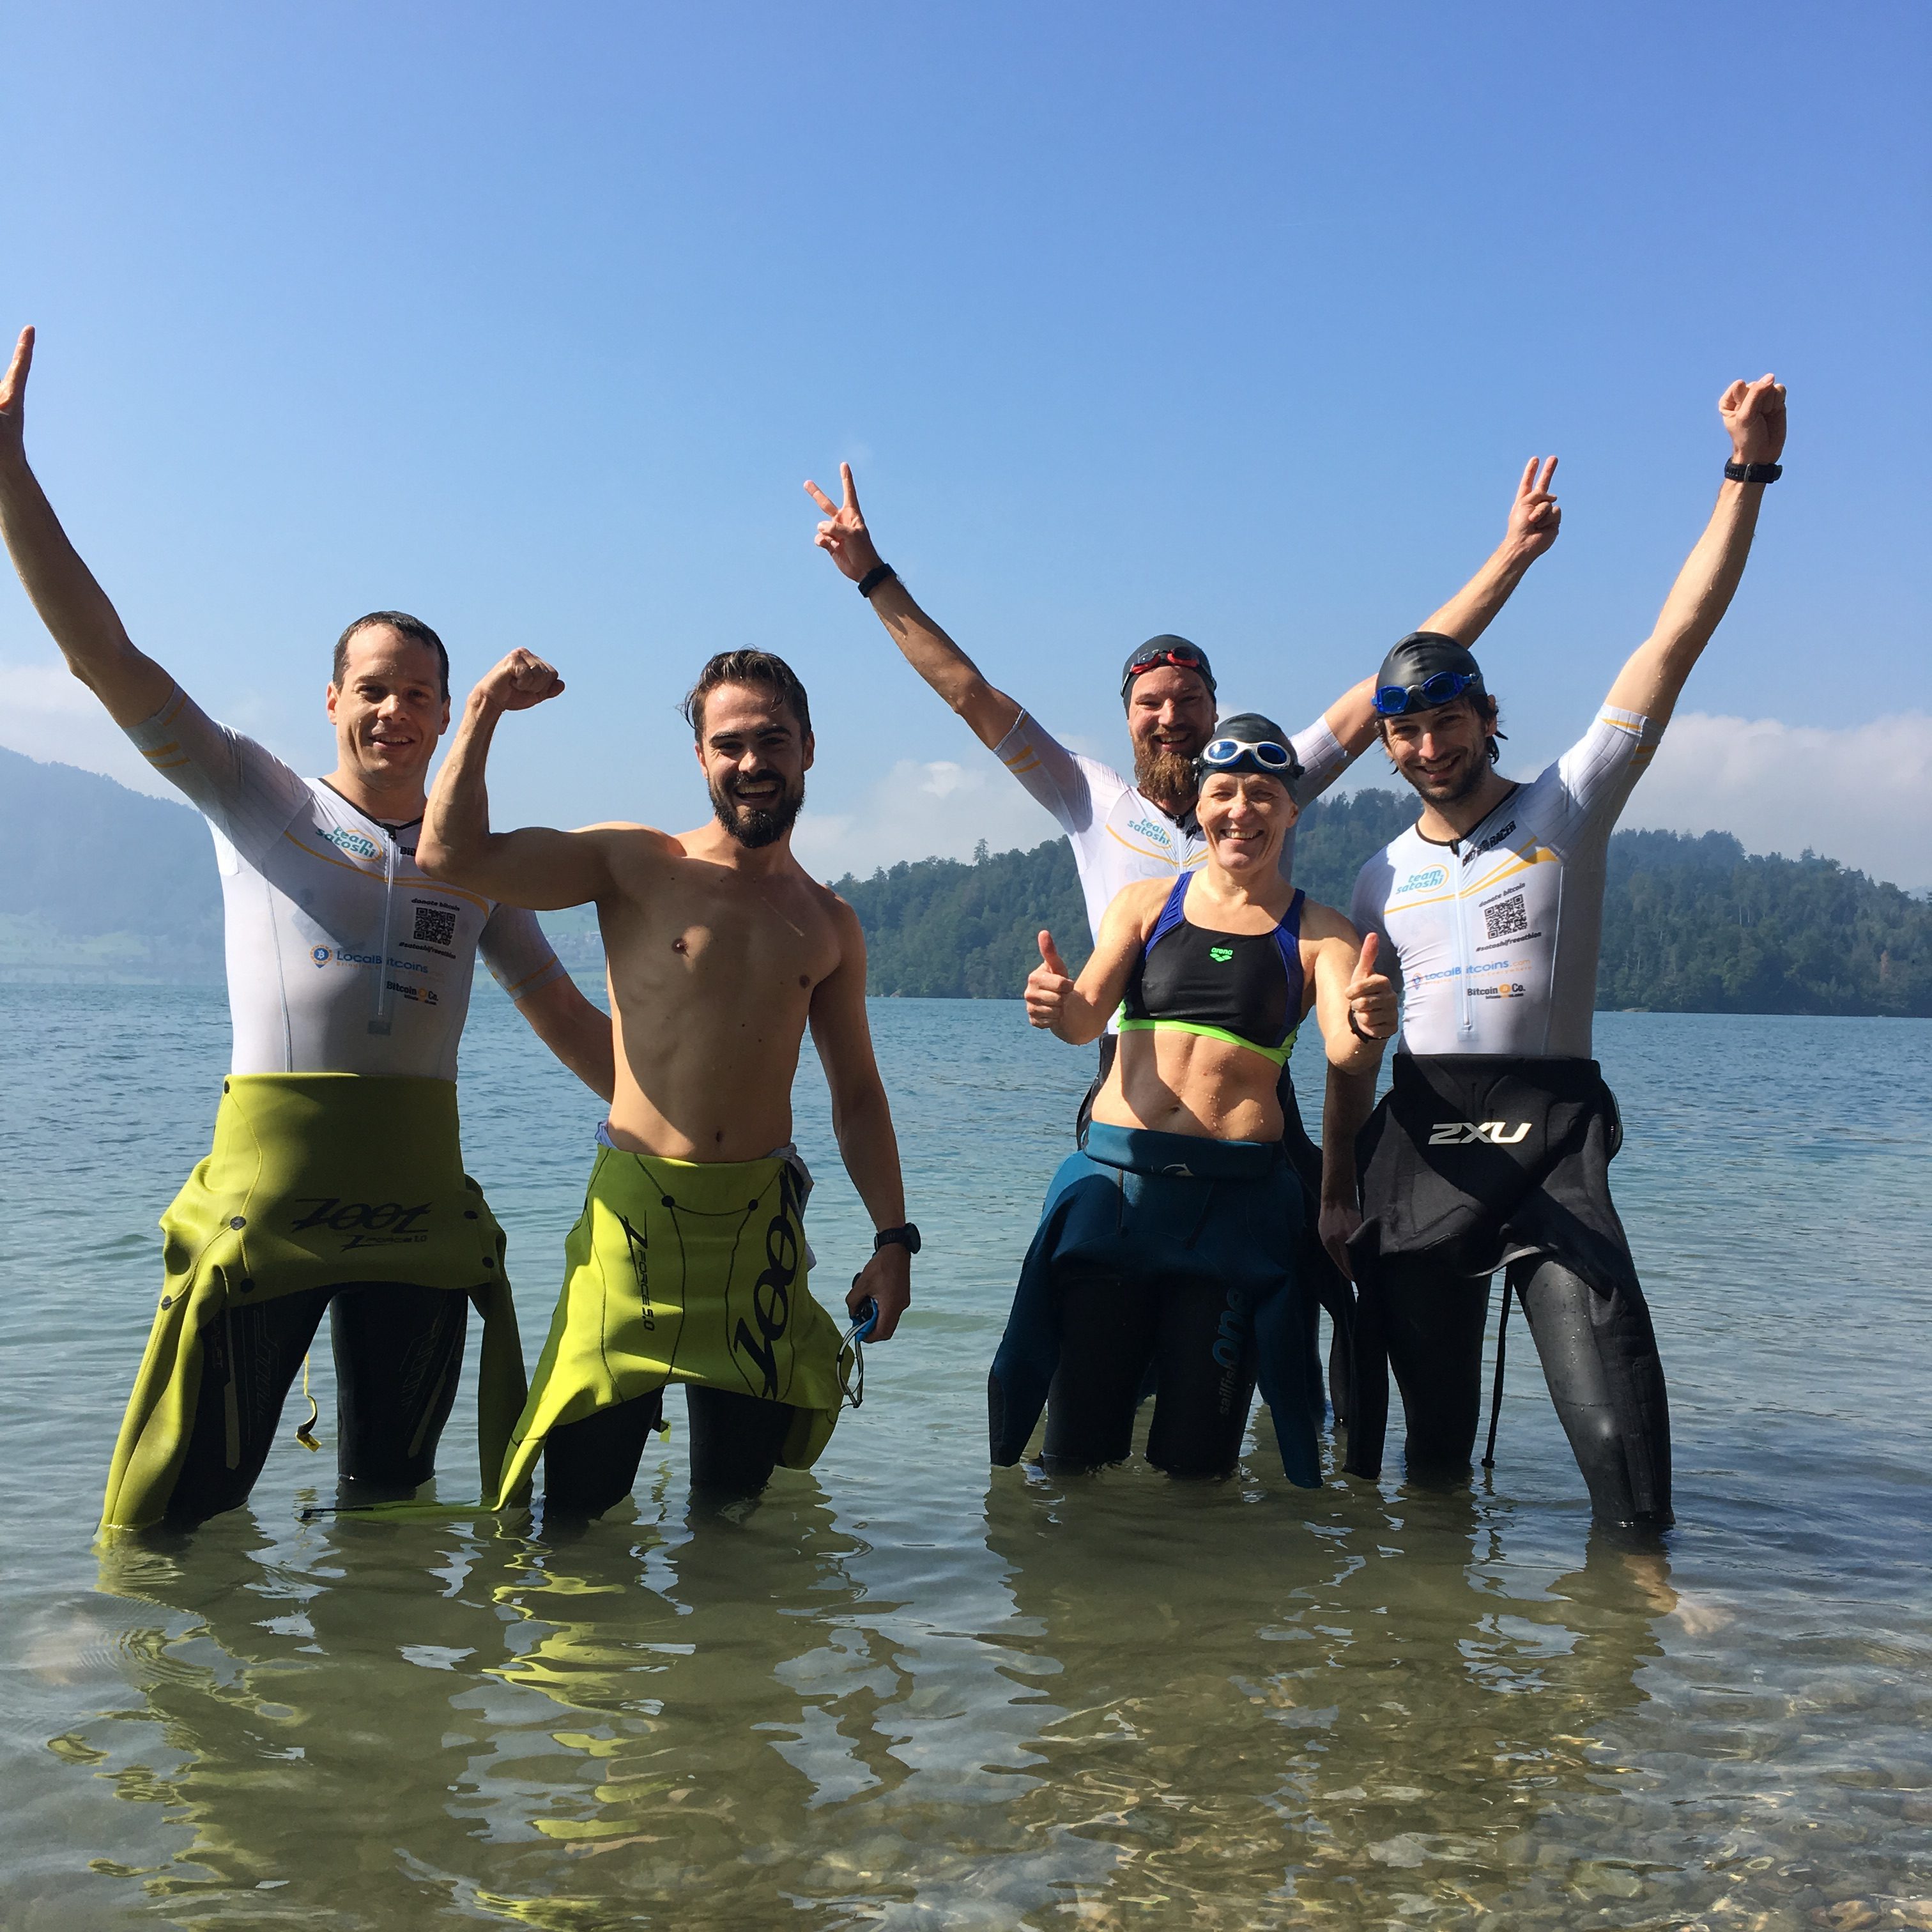 They Biked, Ran And Swam Over 200 Miles Across Europe – All For Bitcoin